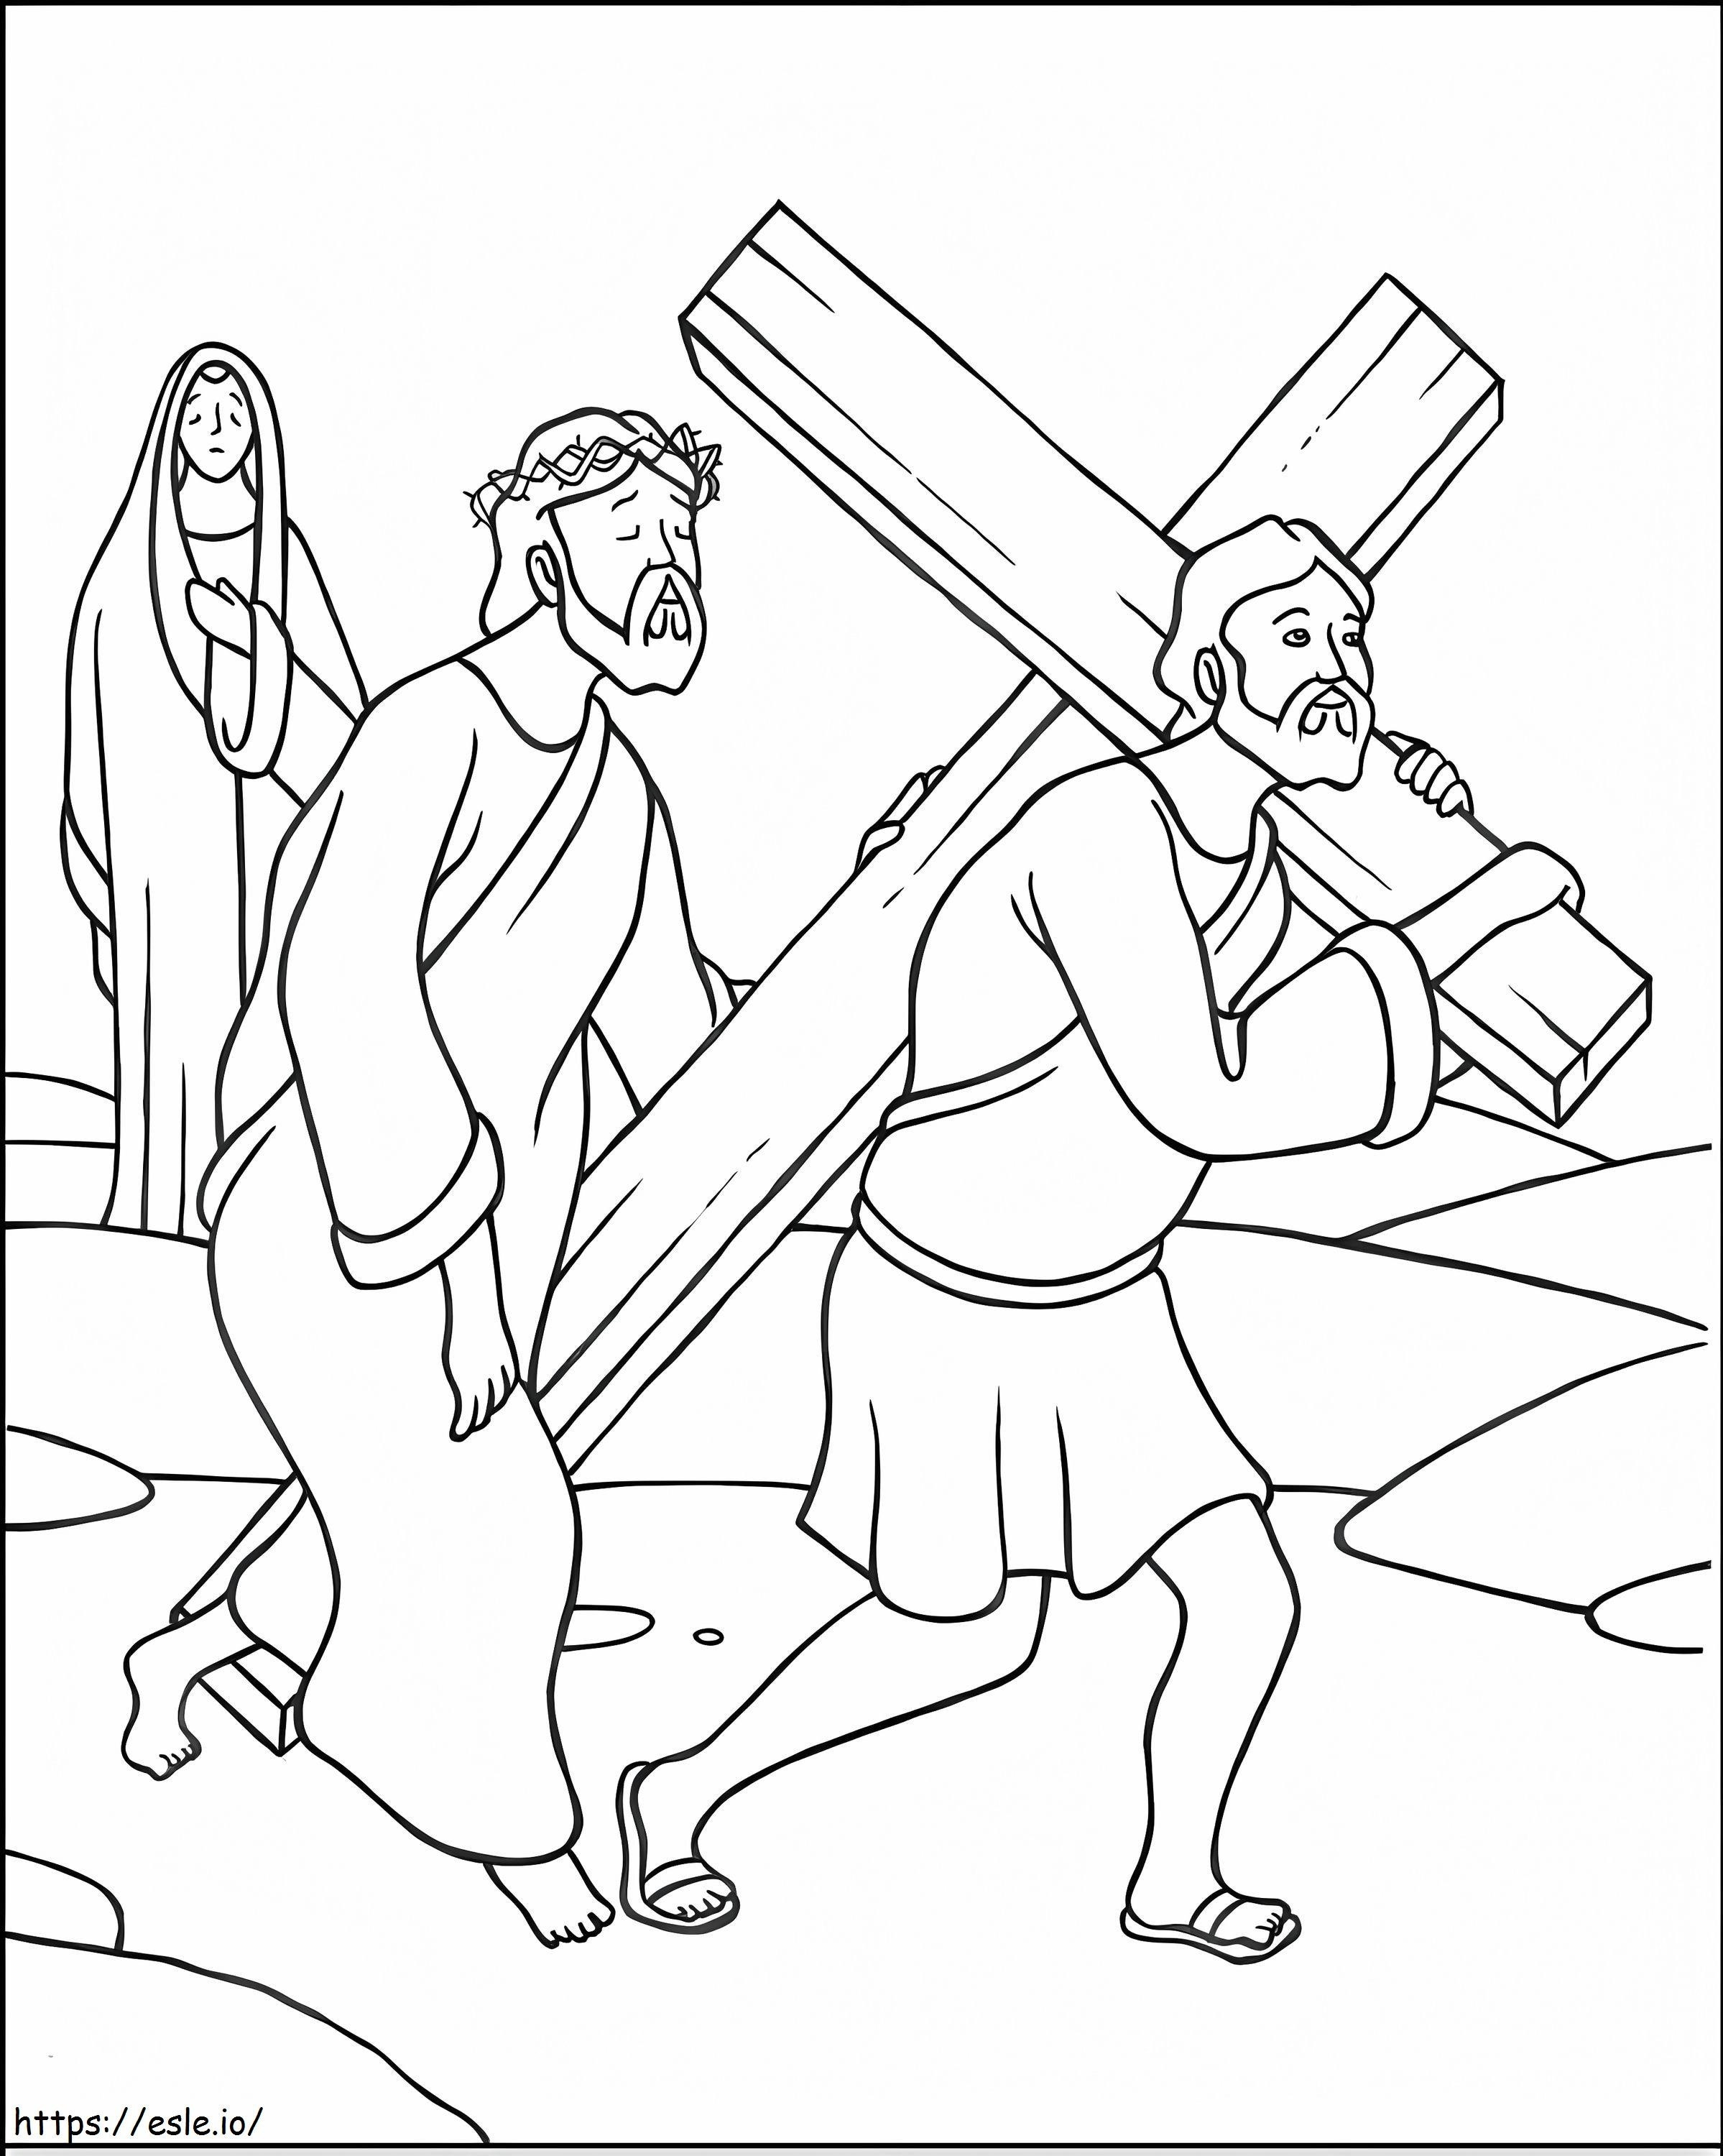 Station 5 Stations Of The Cross coloring page